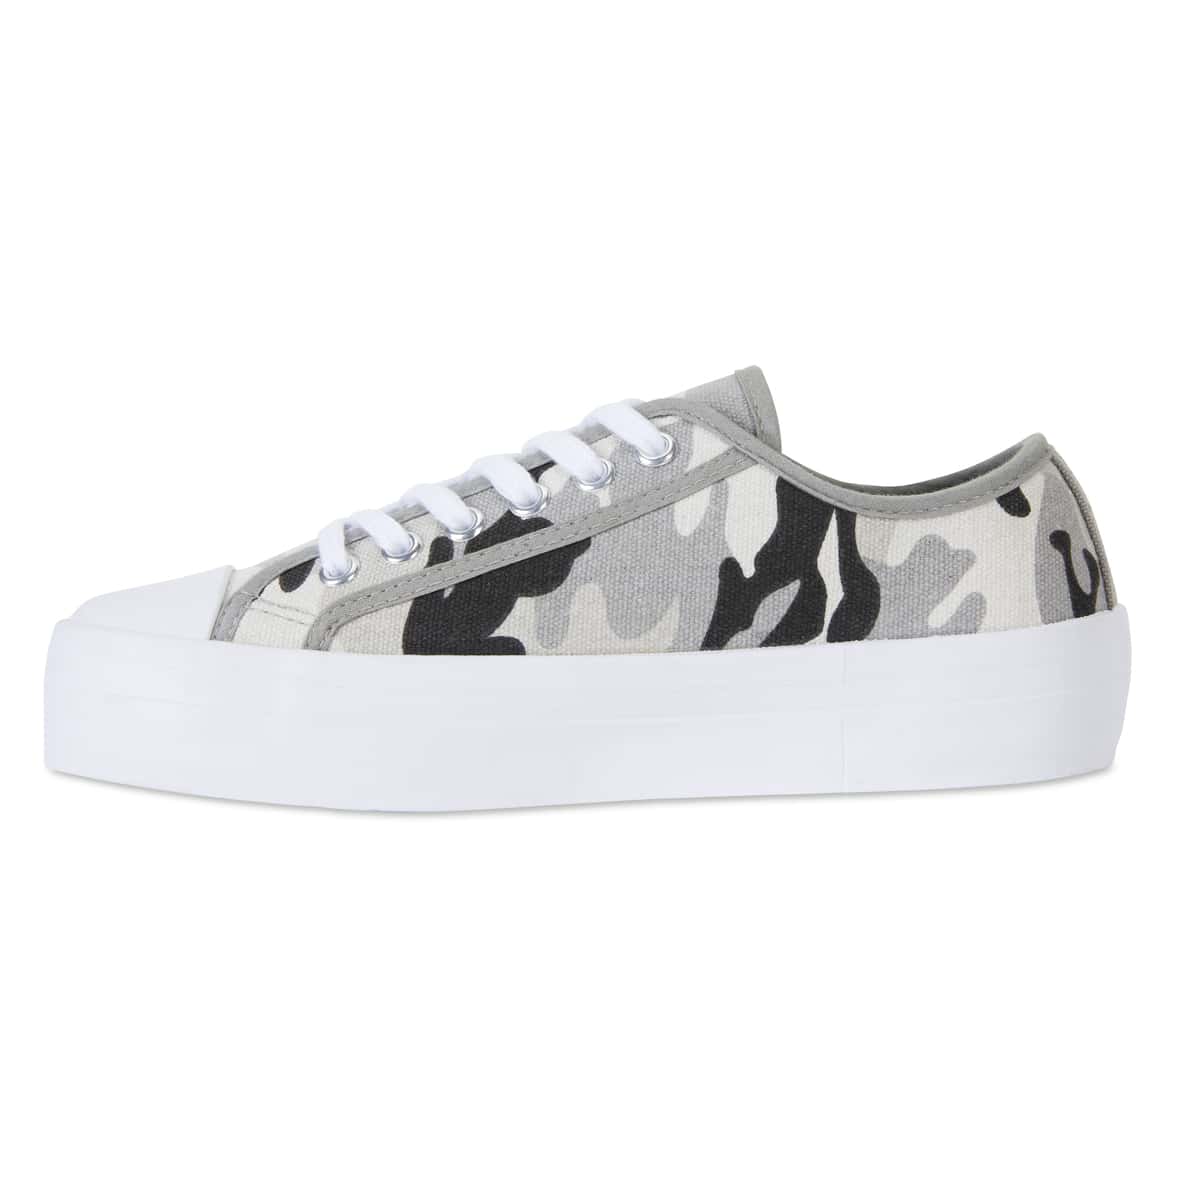 Stacey Sneaker in Light Camouflage Canvas